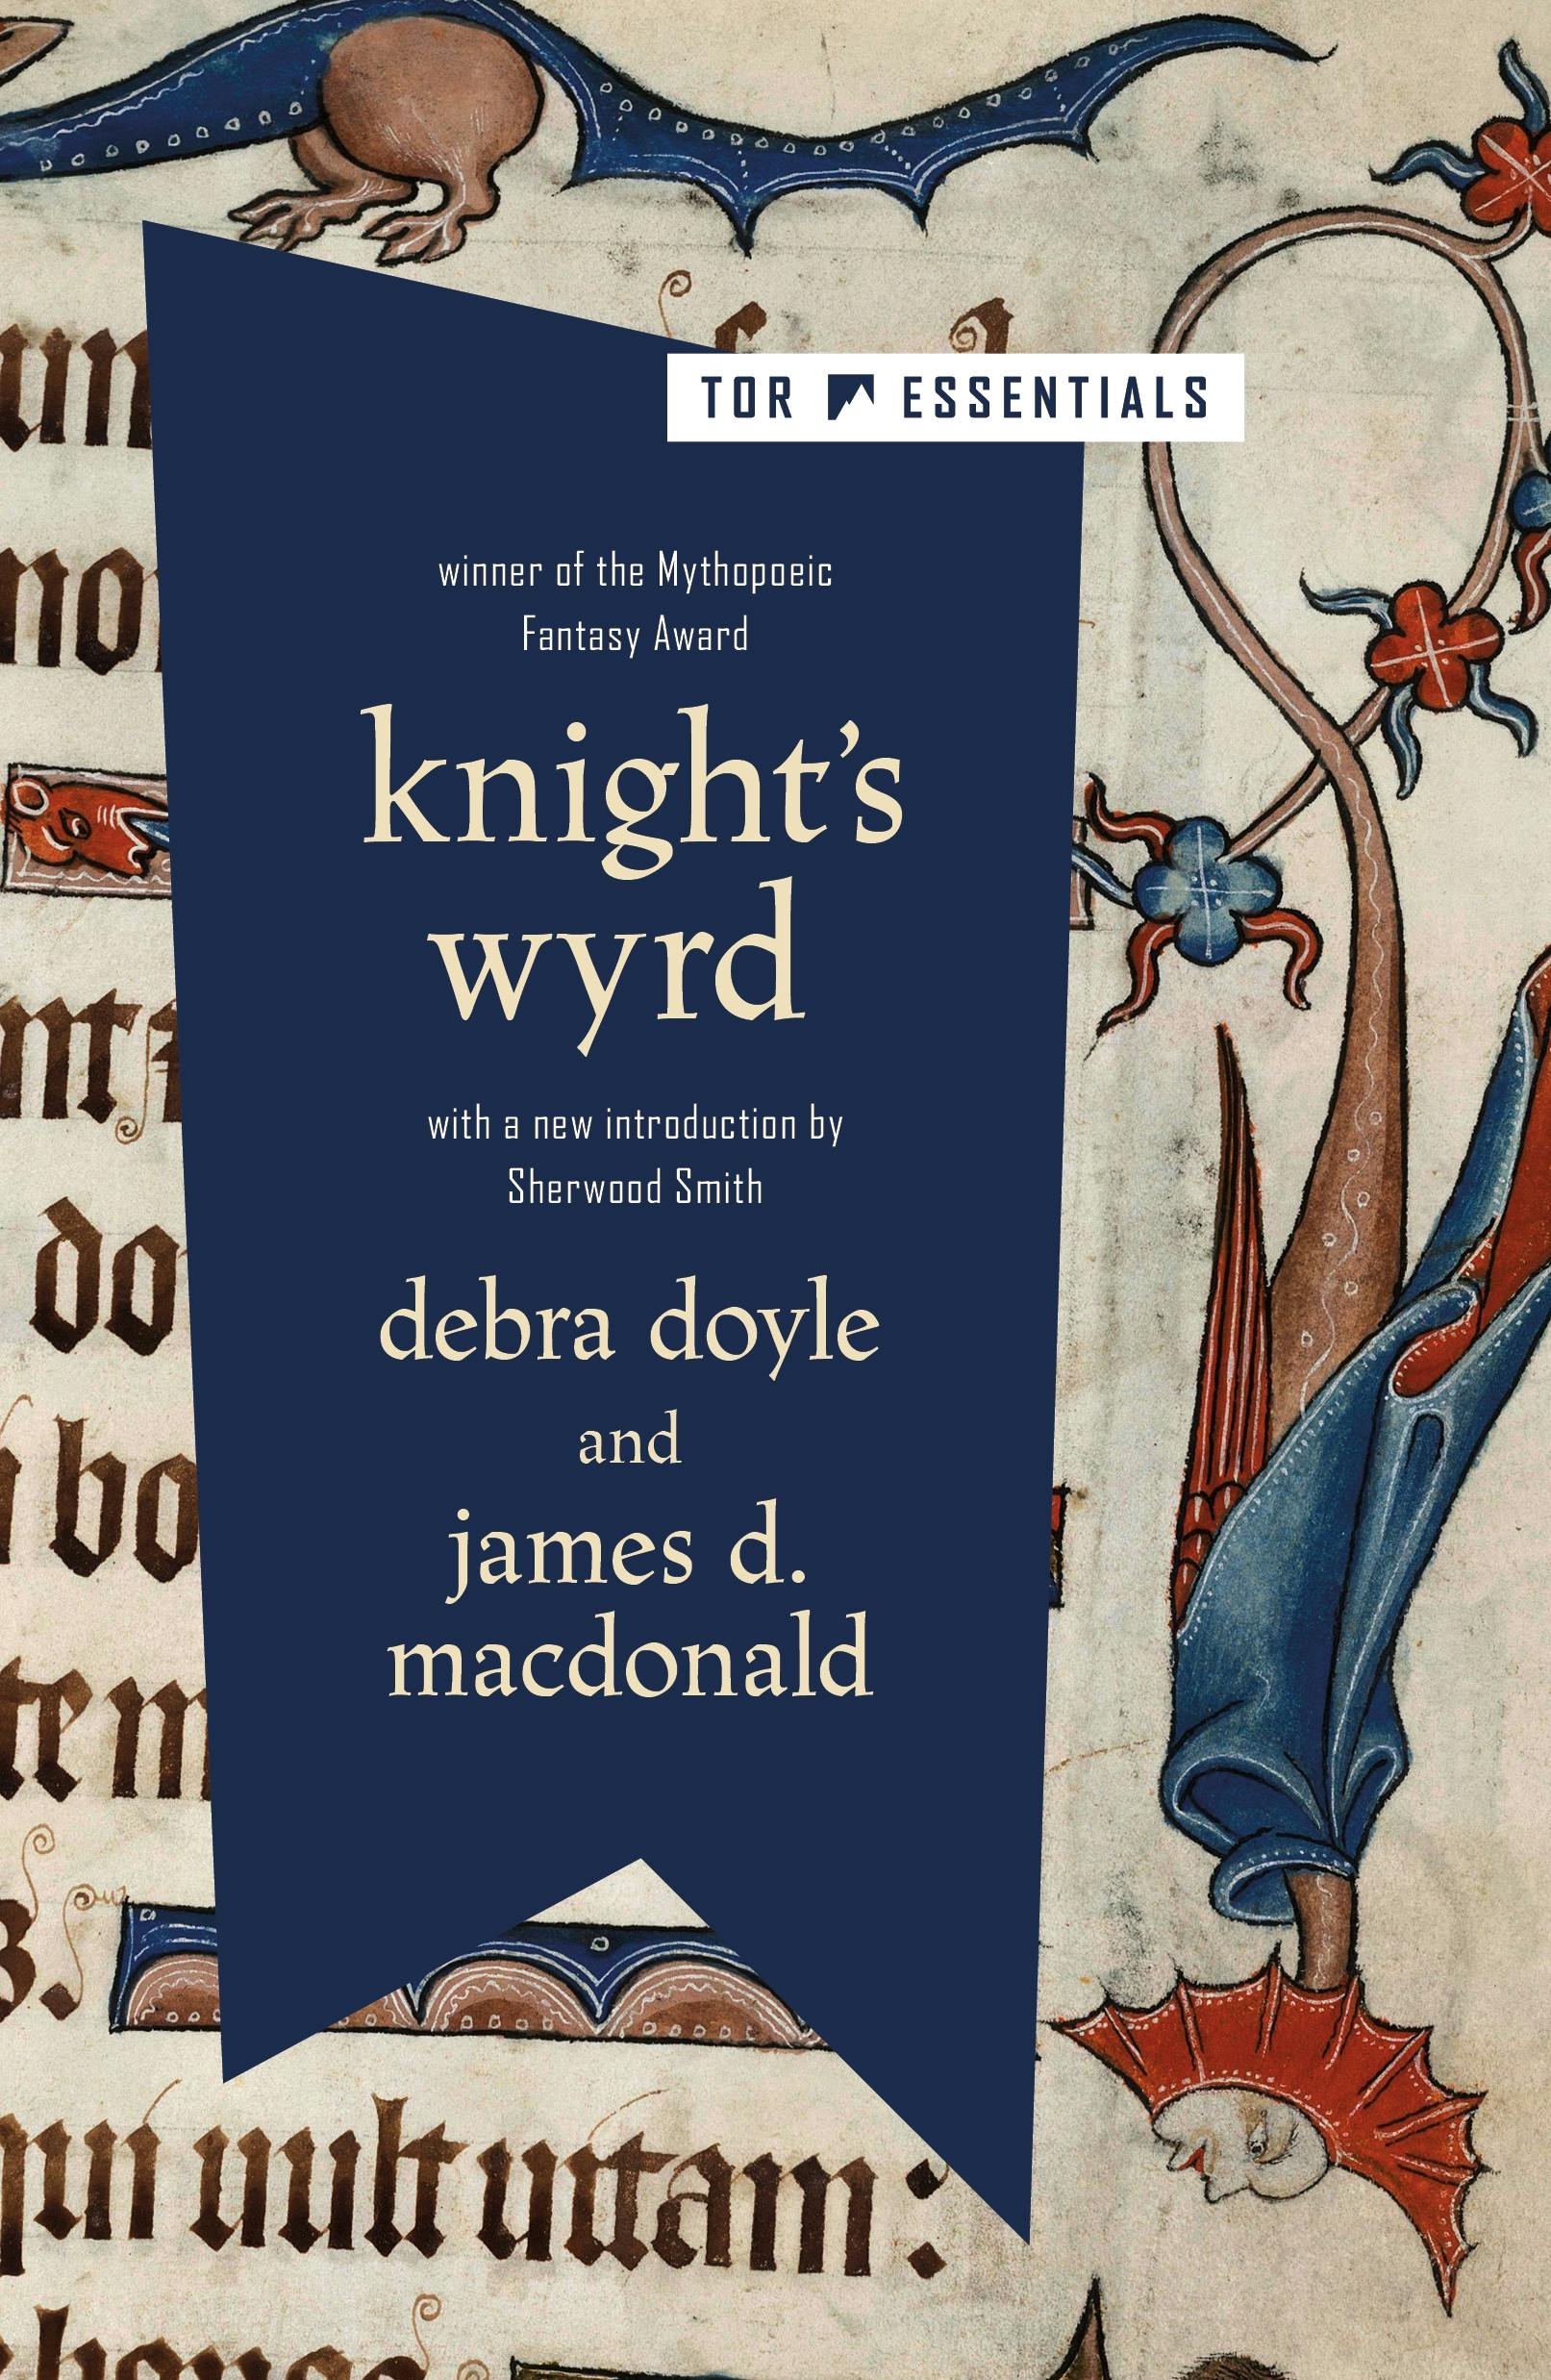 Cover for the book titled as: Knight's Wyrd